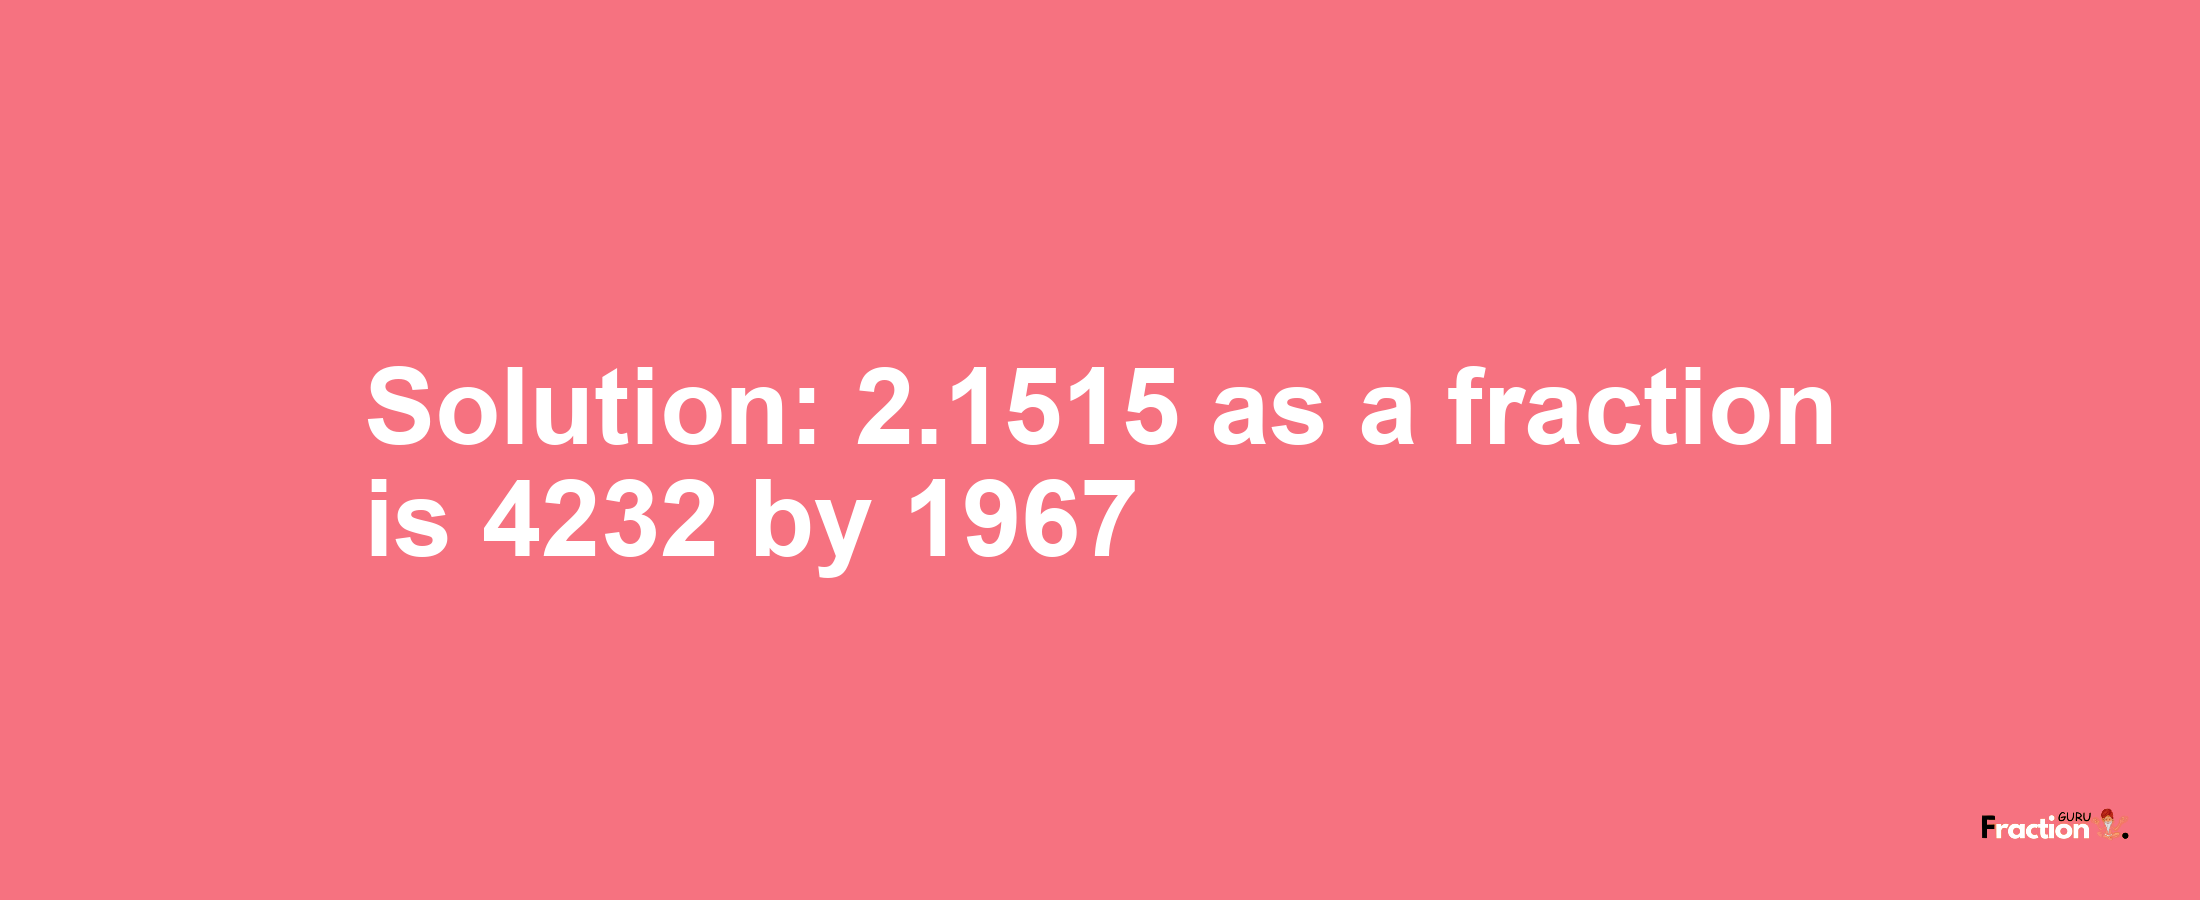 Solution:2.1515 as a fraction is 4232/1967